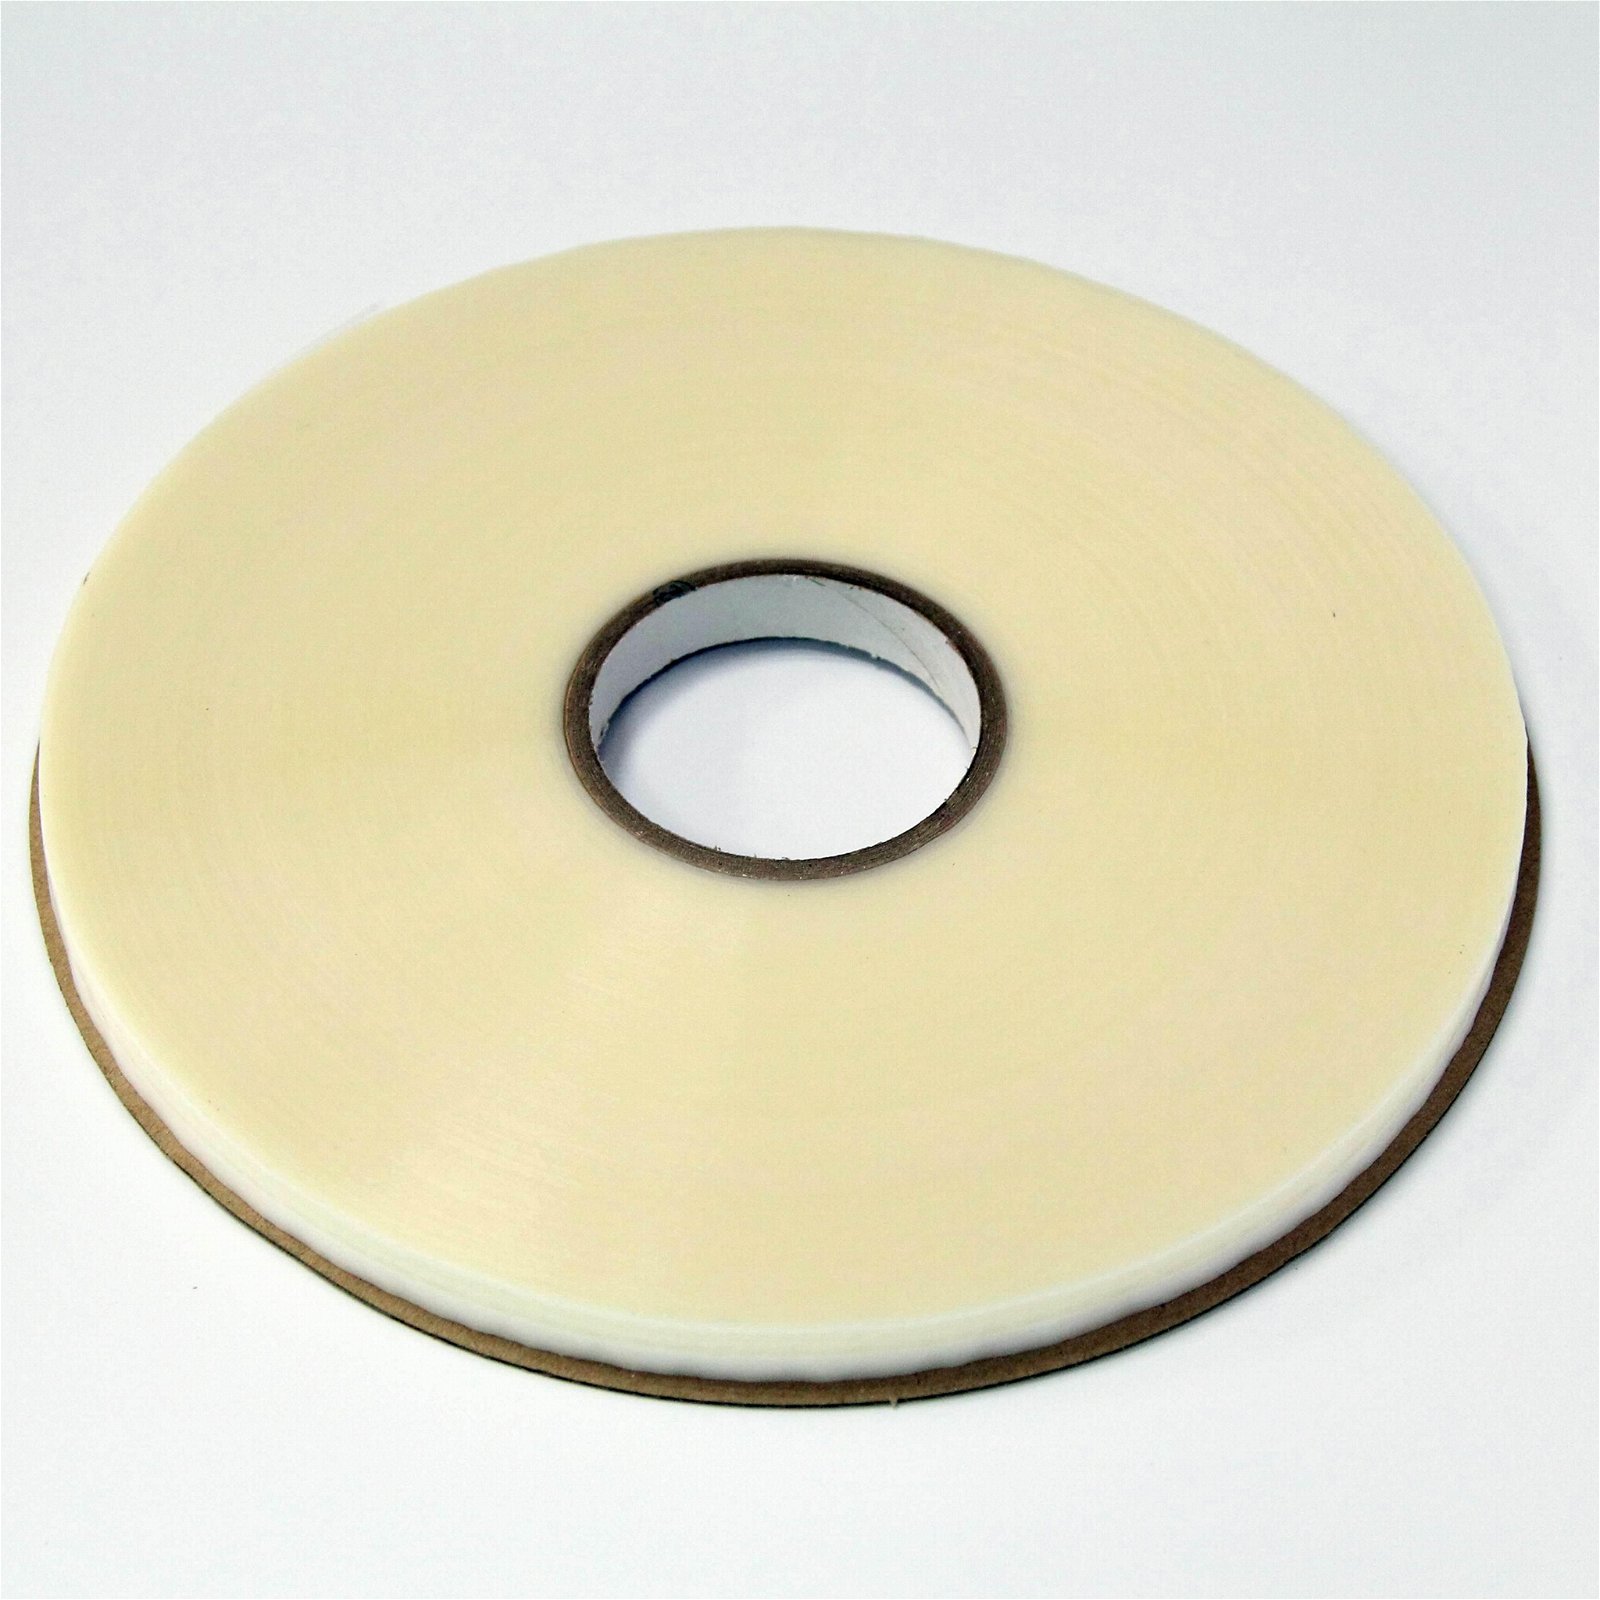 Colored Liner Resealable Bag Sealing Tape 4